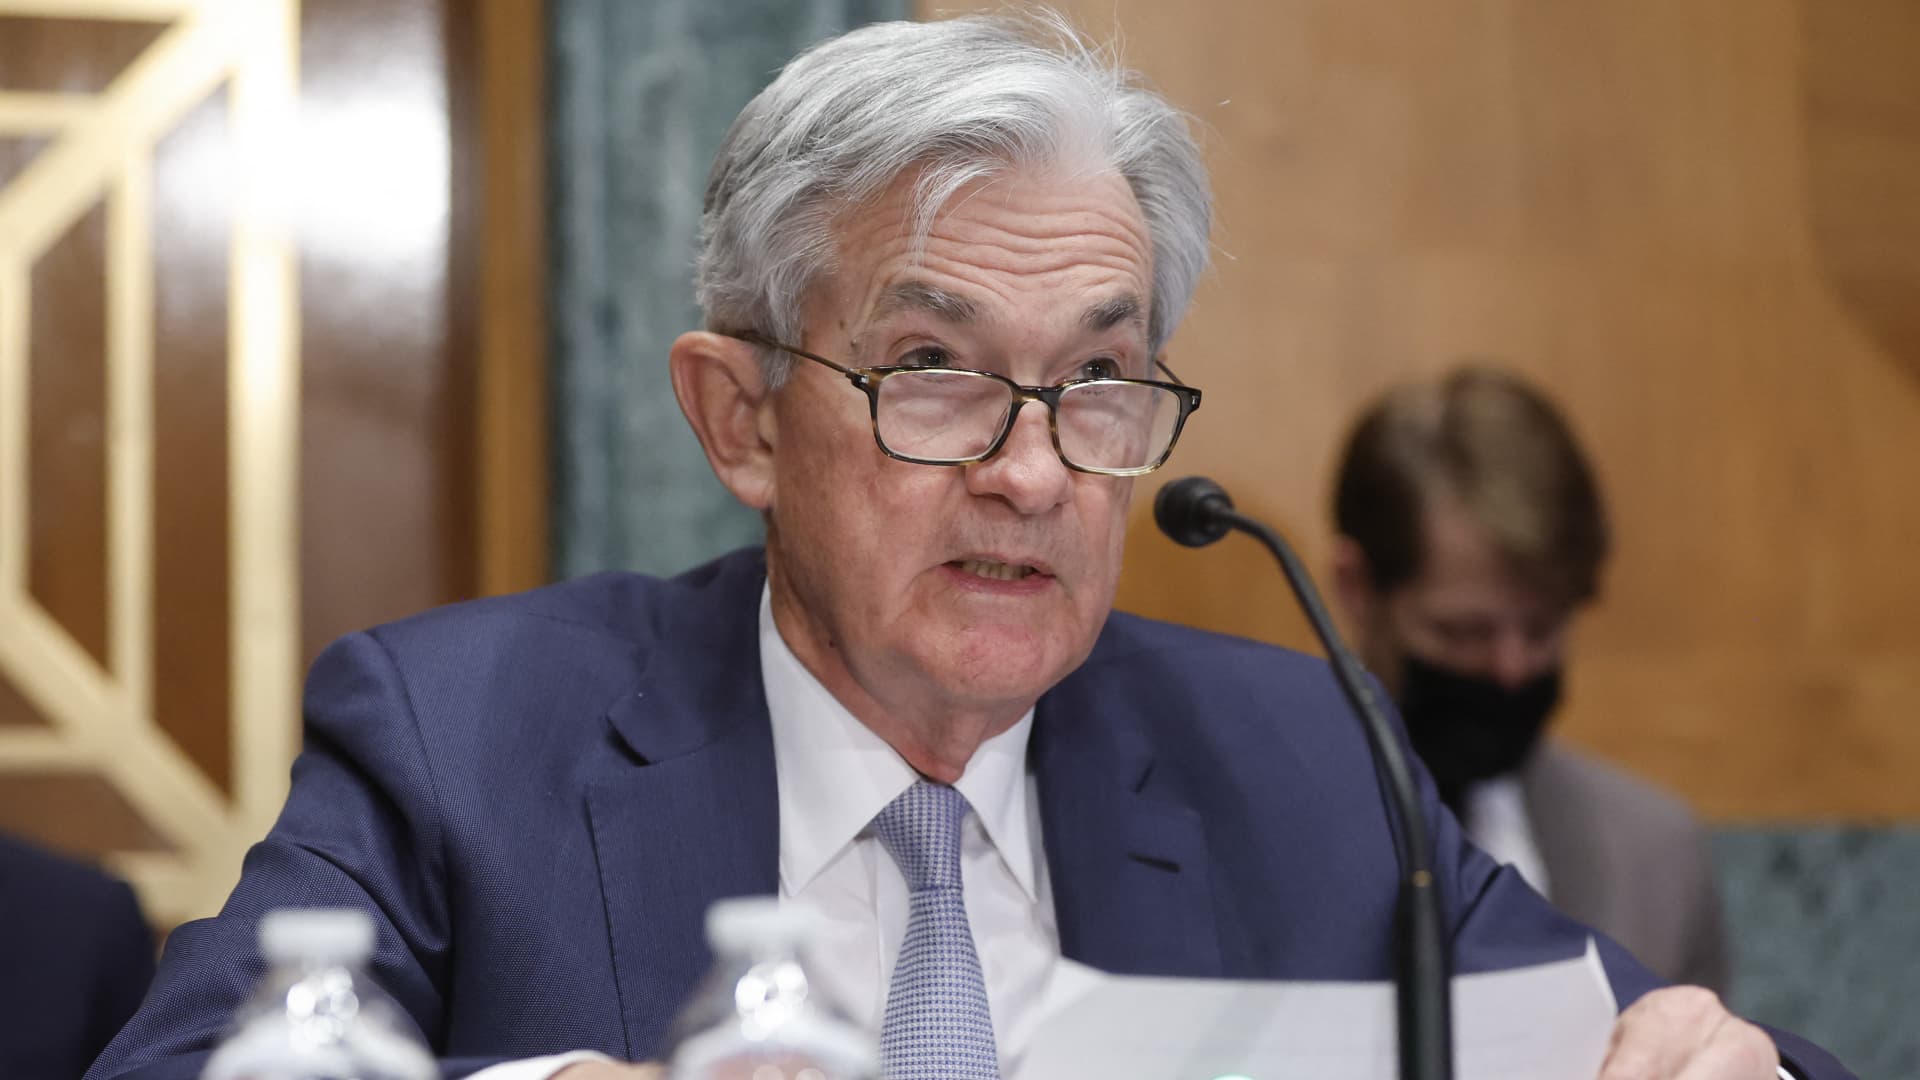 Powell says the Fed will not hesitate to continue raising interest rates until inflation falls